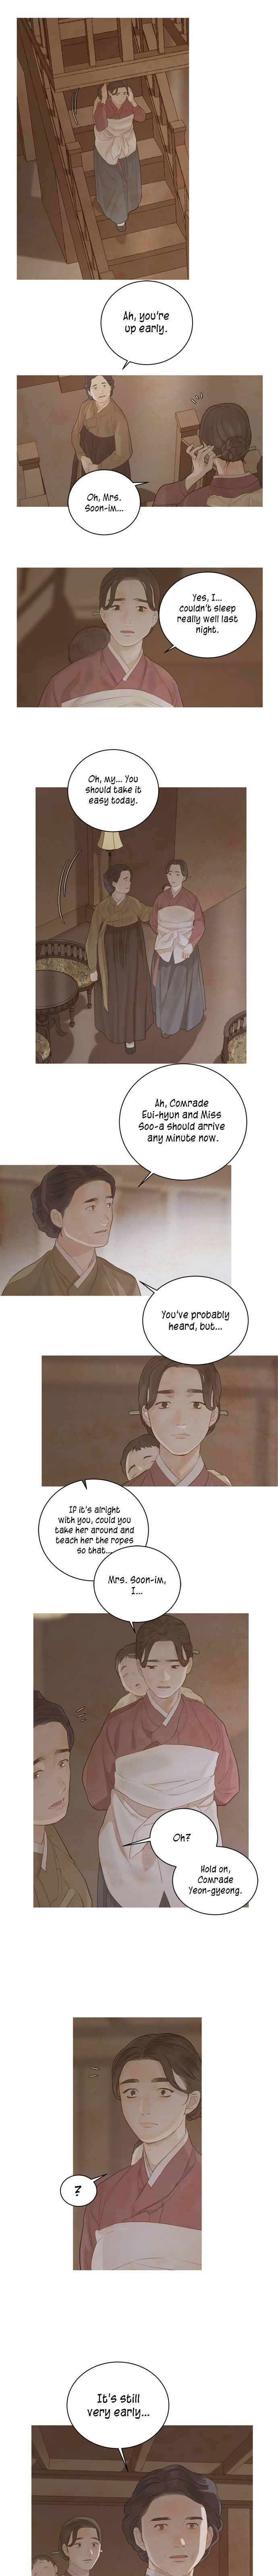 Gorae Byul - The Gyeongseong Mermaid - Chapter 28 Page 8